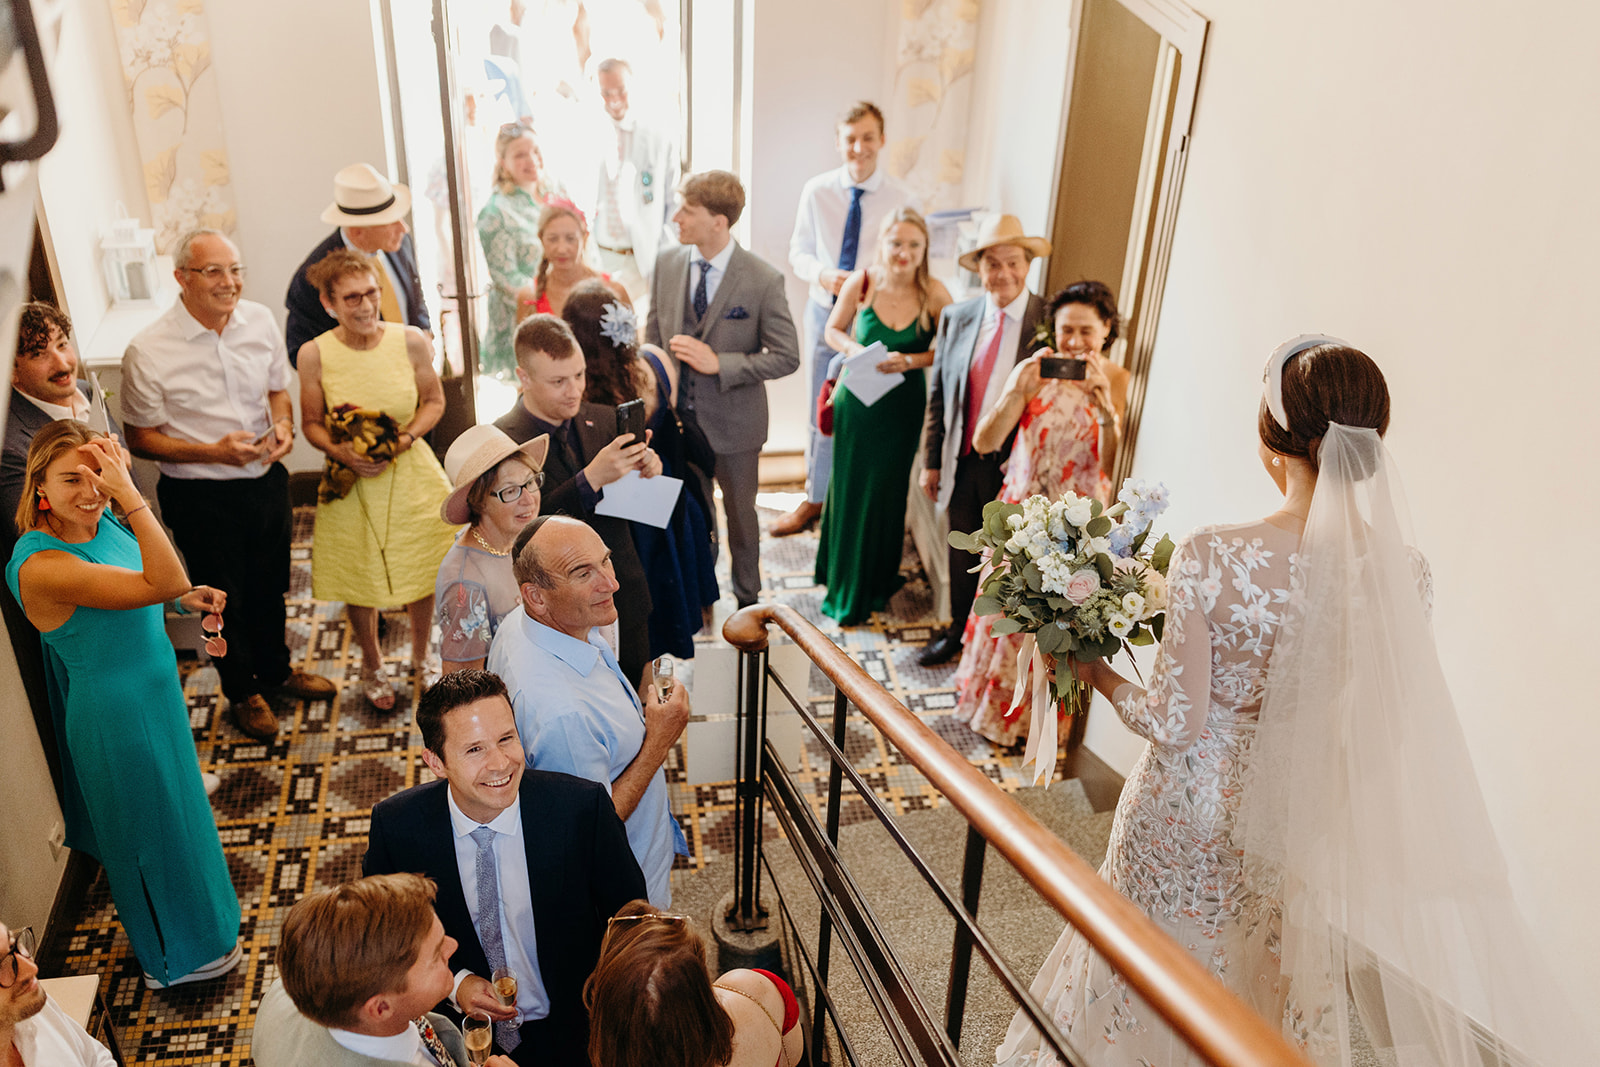 Guests watching bride come down stairs 